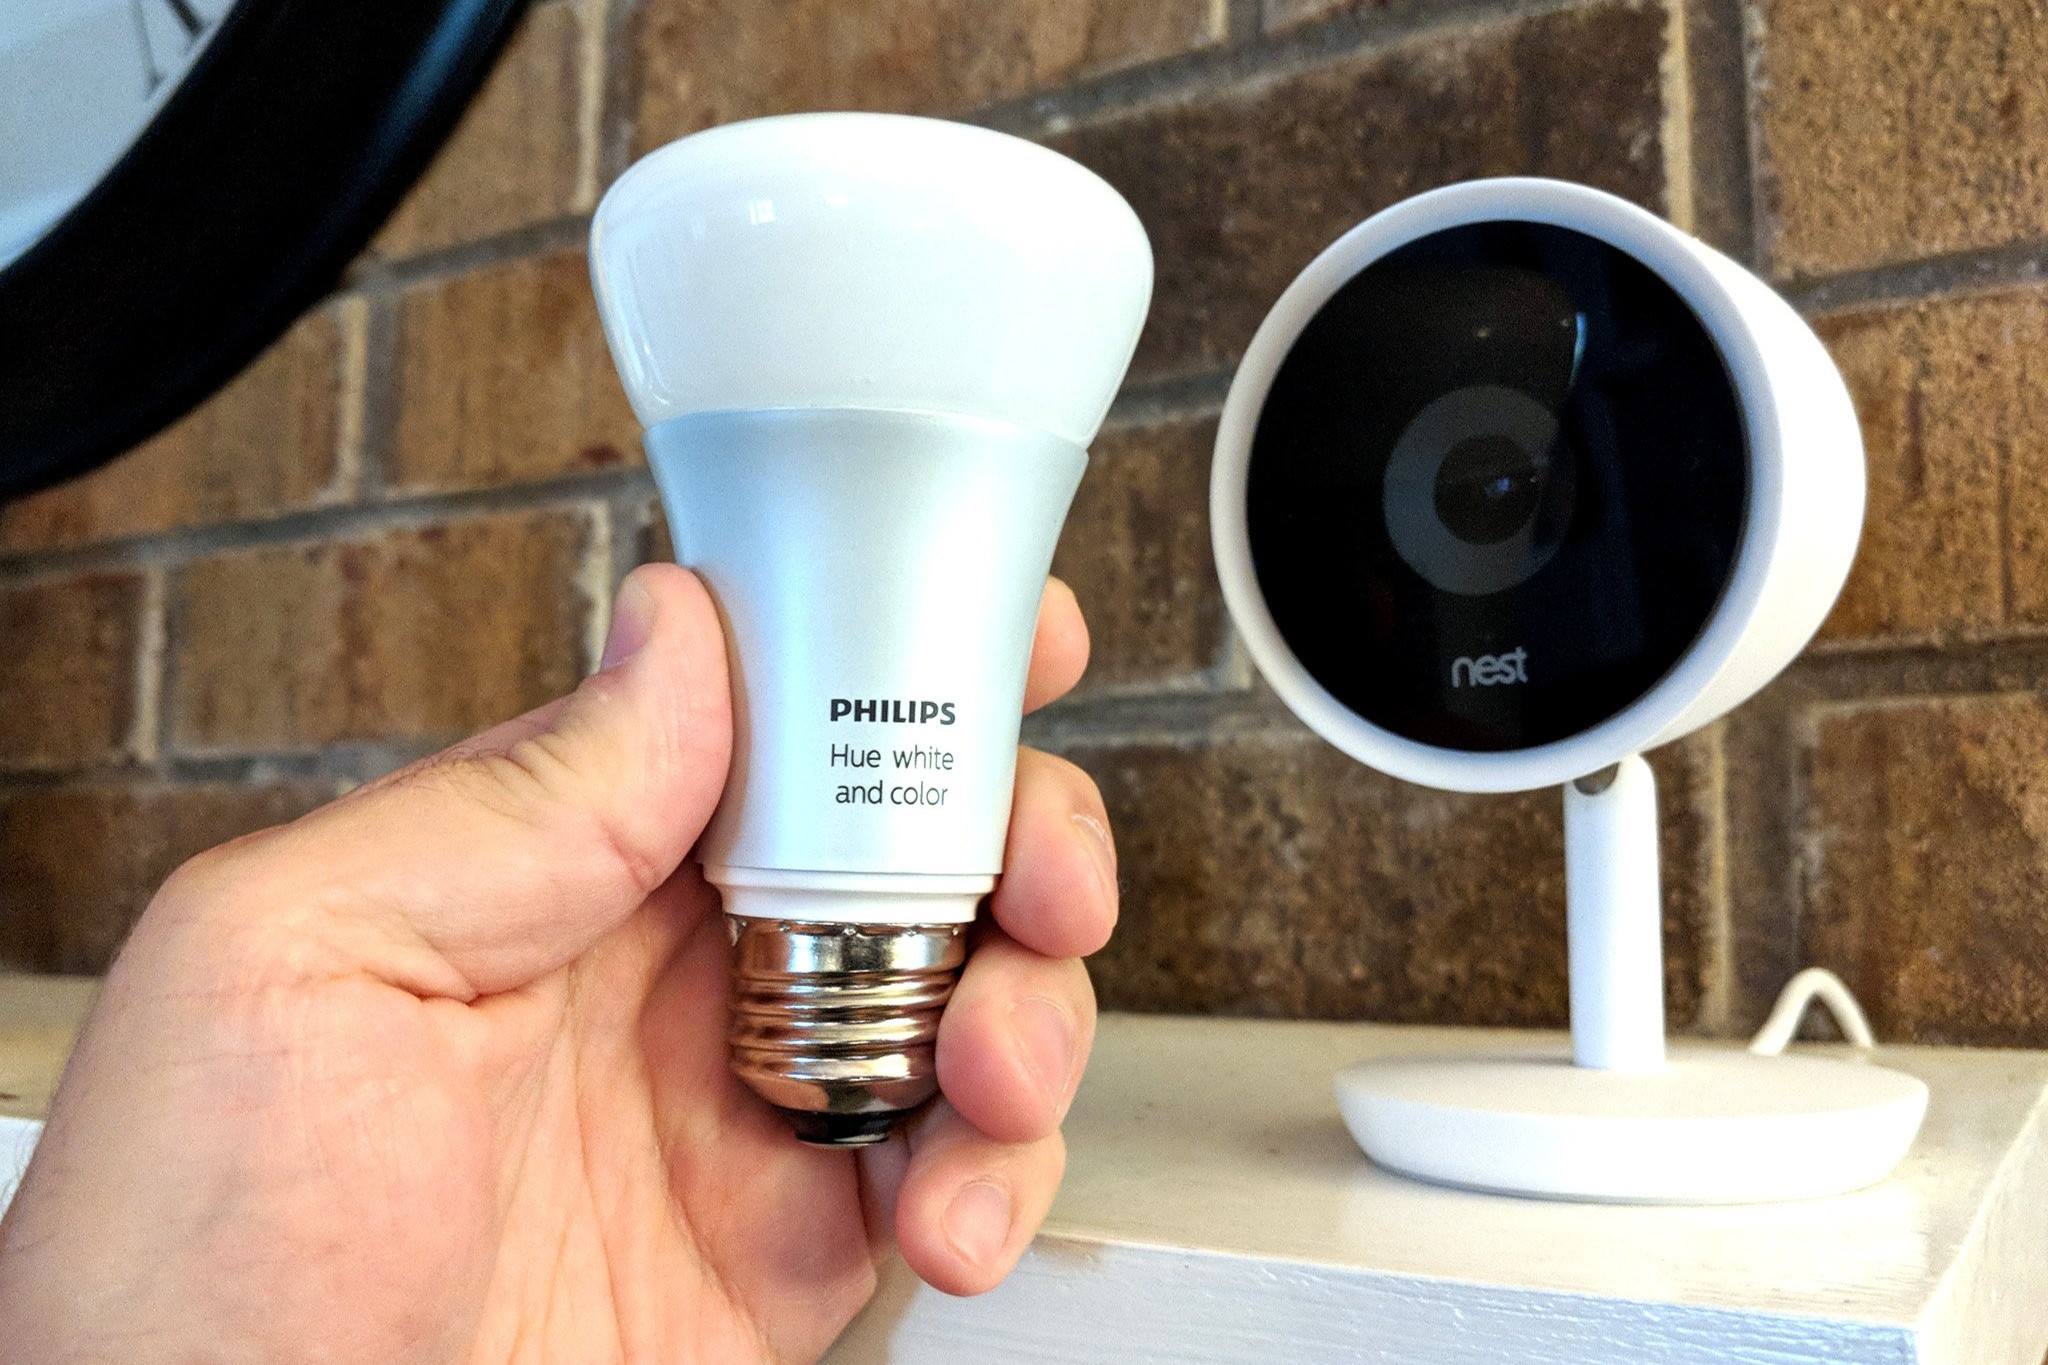 How Does Philips Hue Work With Nest